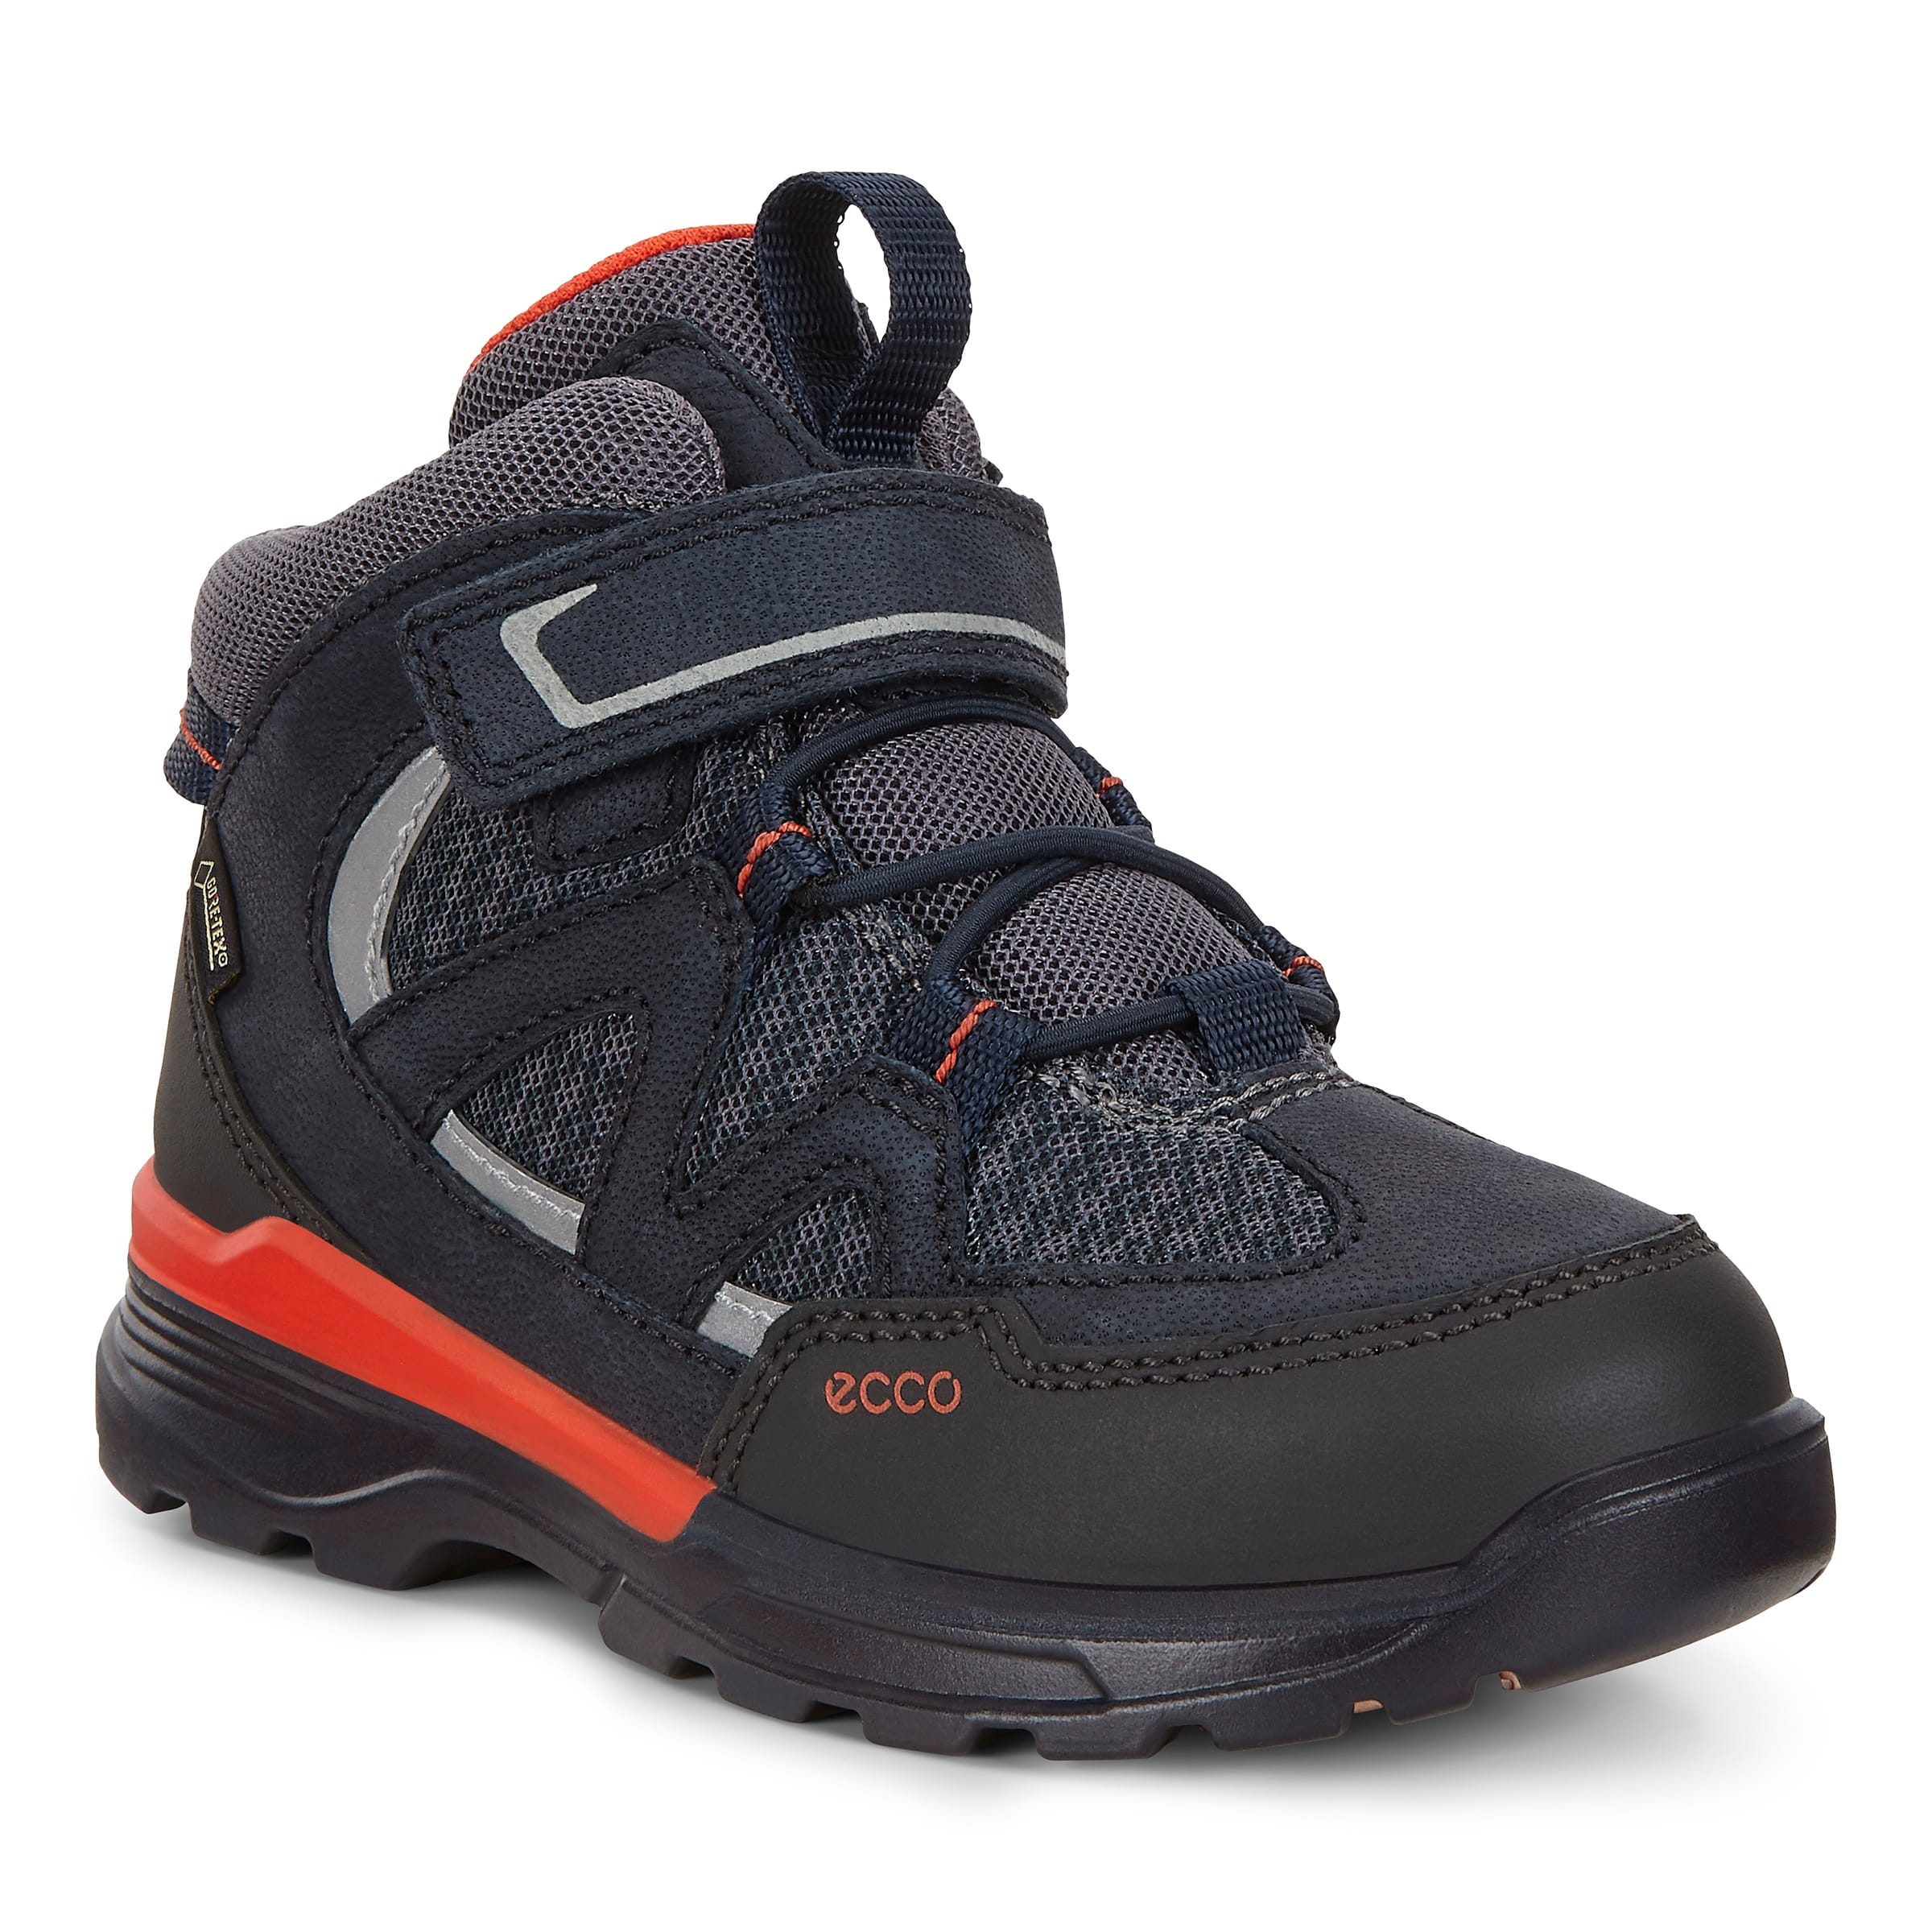 Ecco Urban Hiker from Outnorth